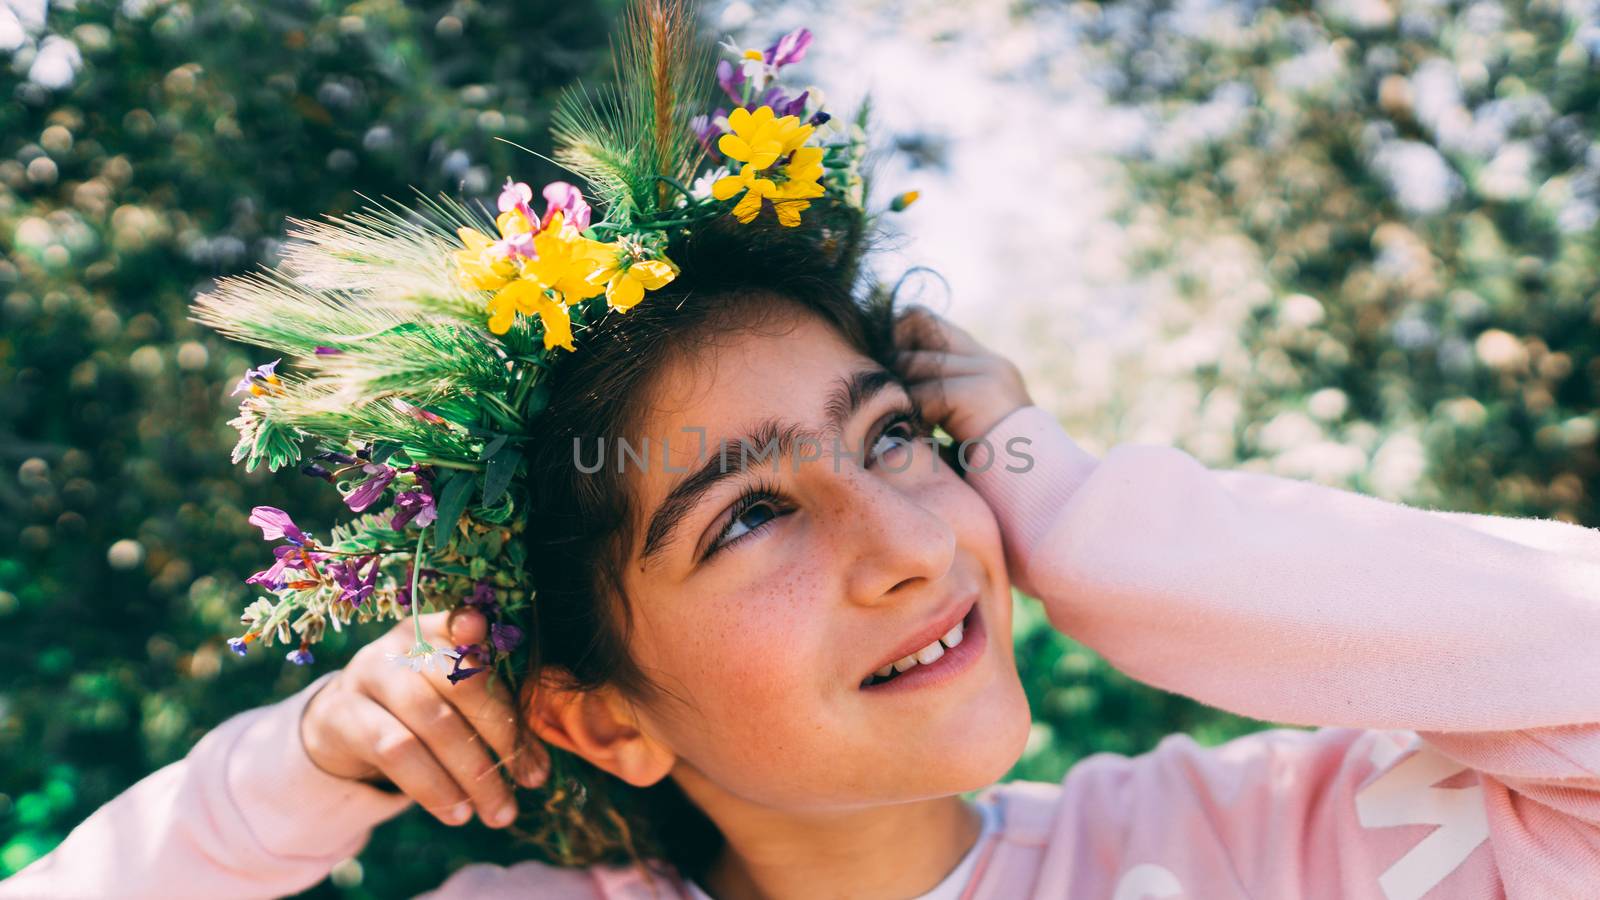 Little caucasian girl with crown from flowers.